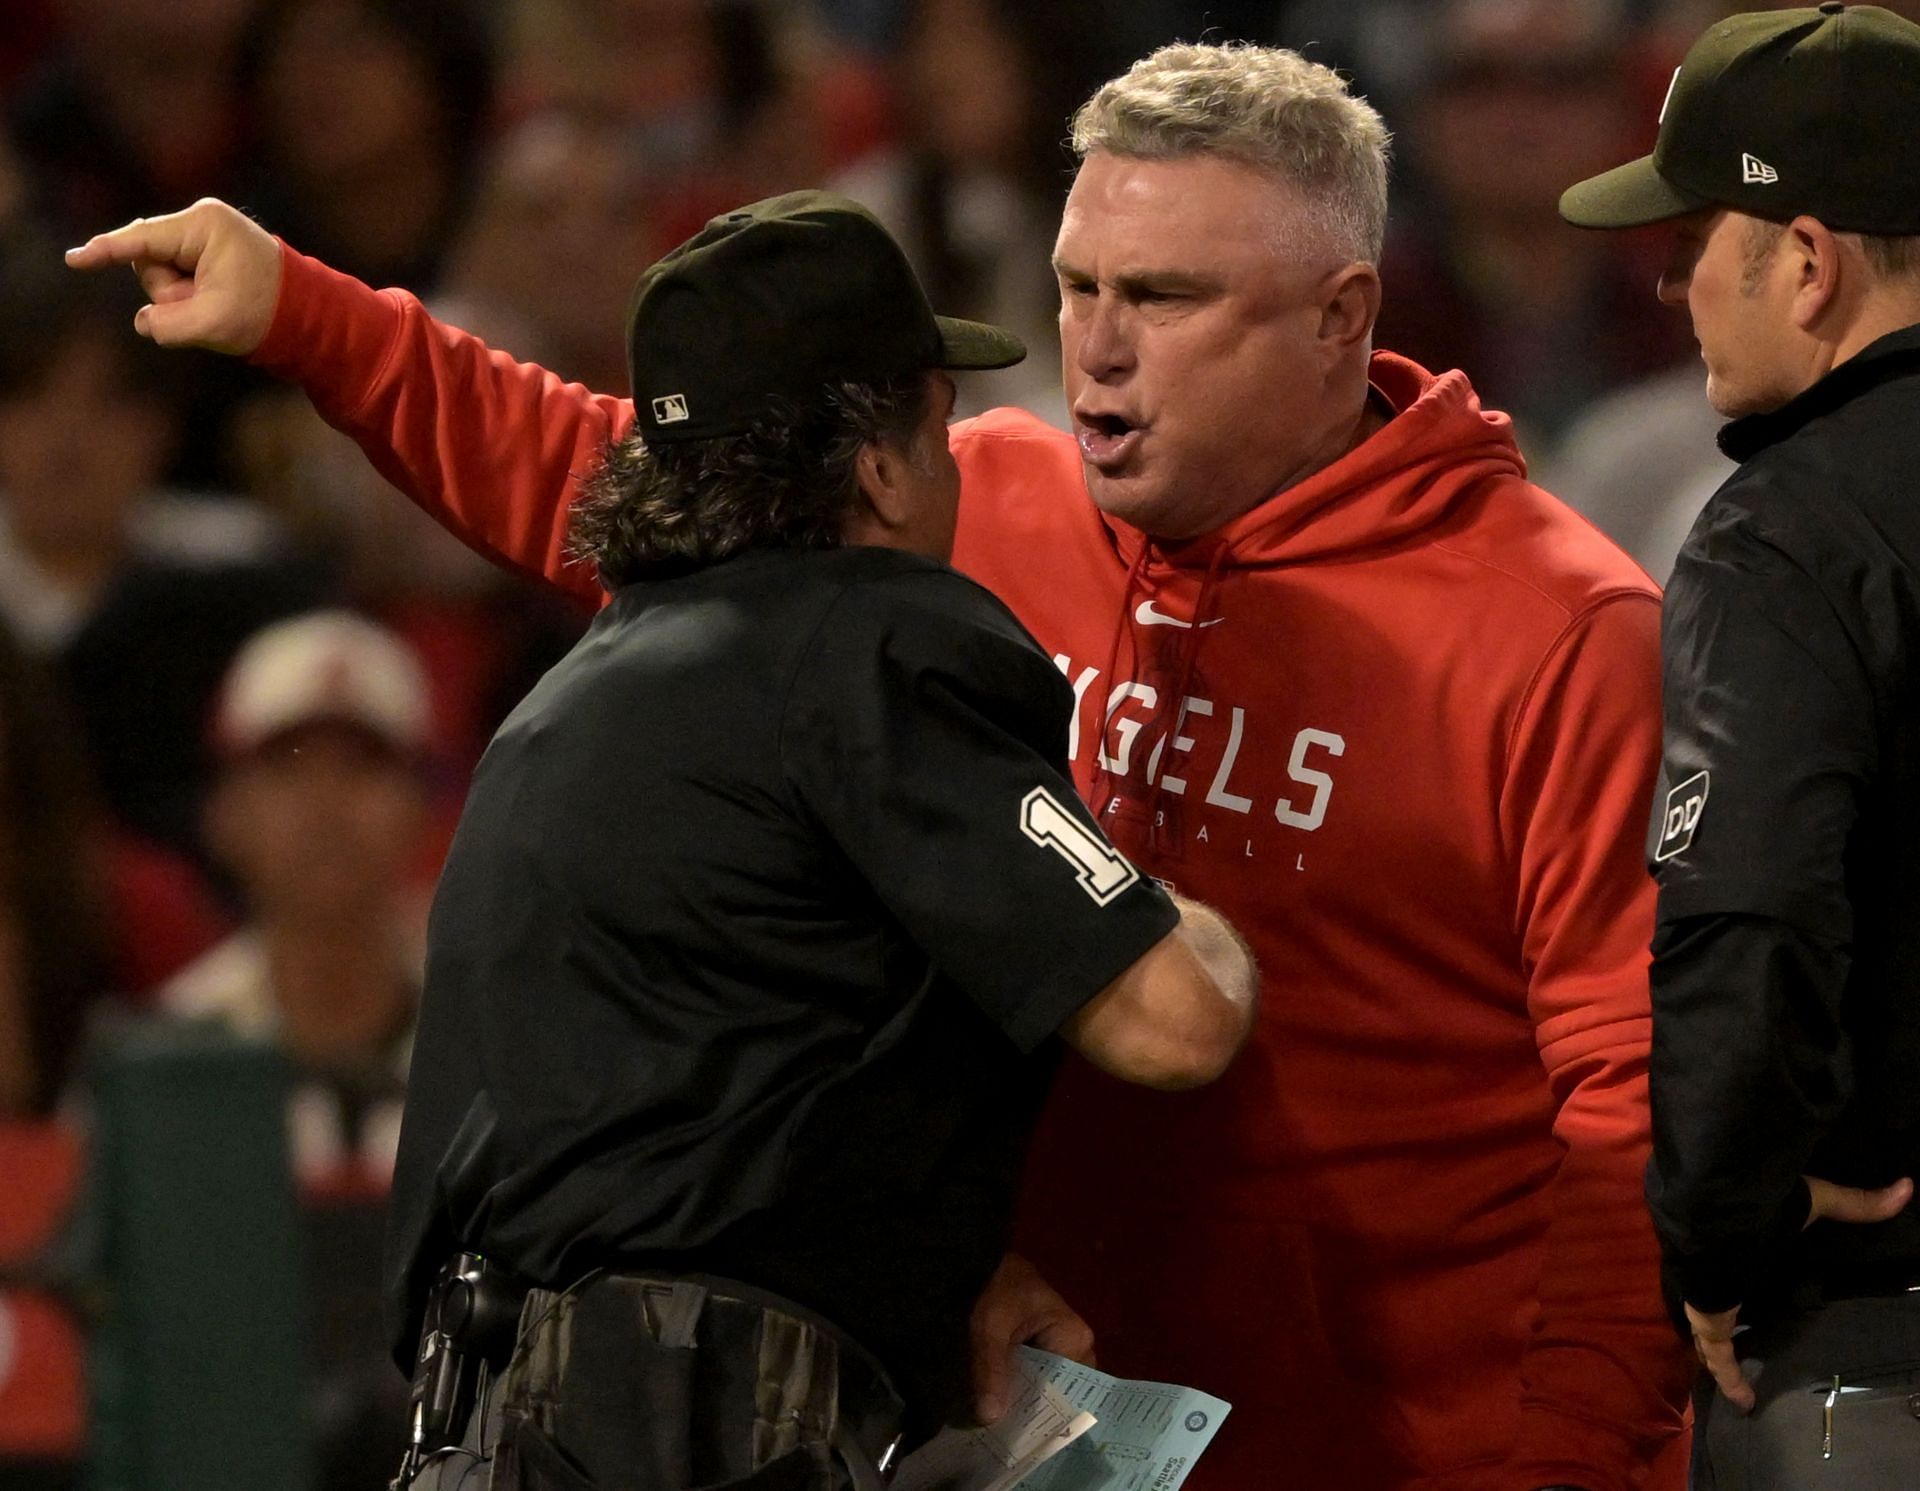 Angels manager Phil Nevin sticks with plan, resting Mike Trout and